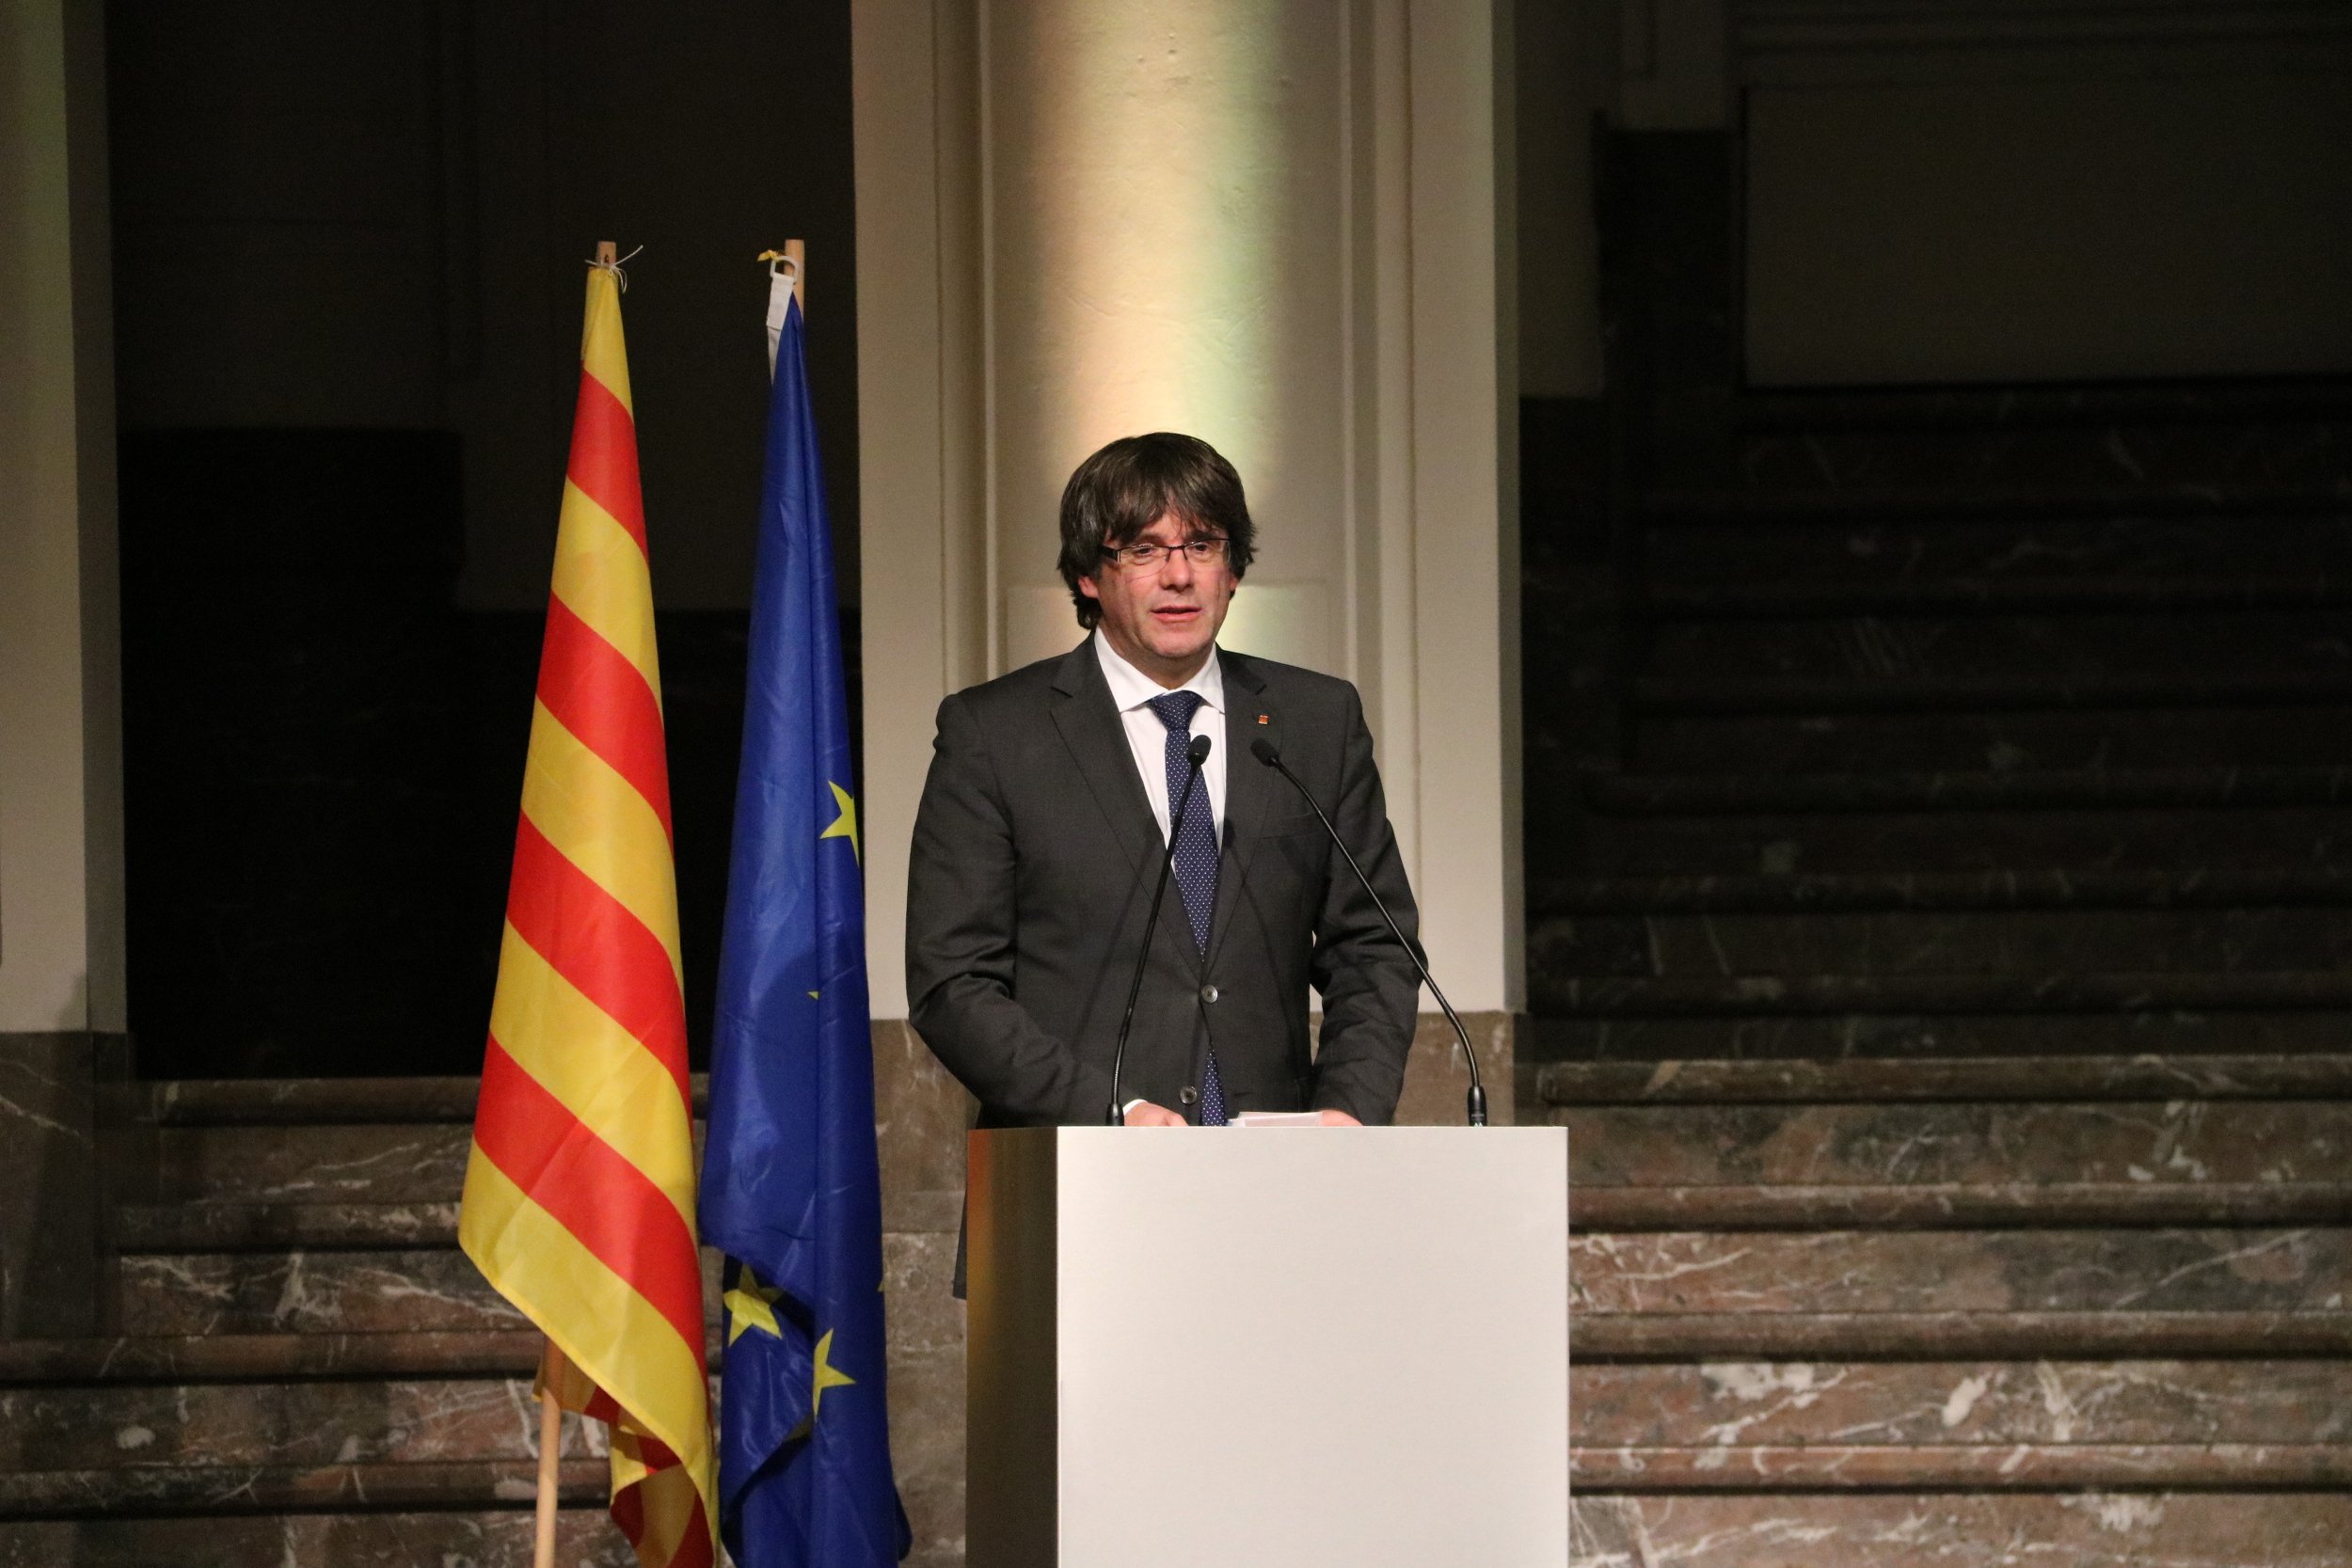 Puigdemont: "The King has supported 'go get them' violence"